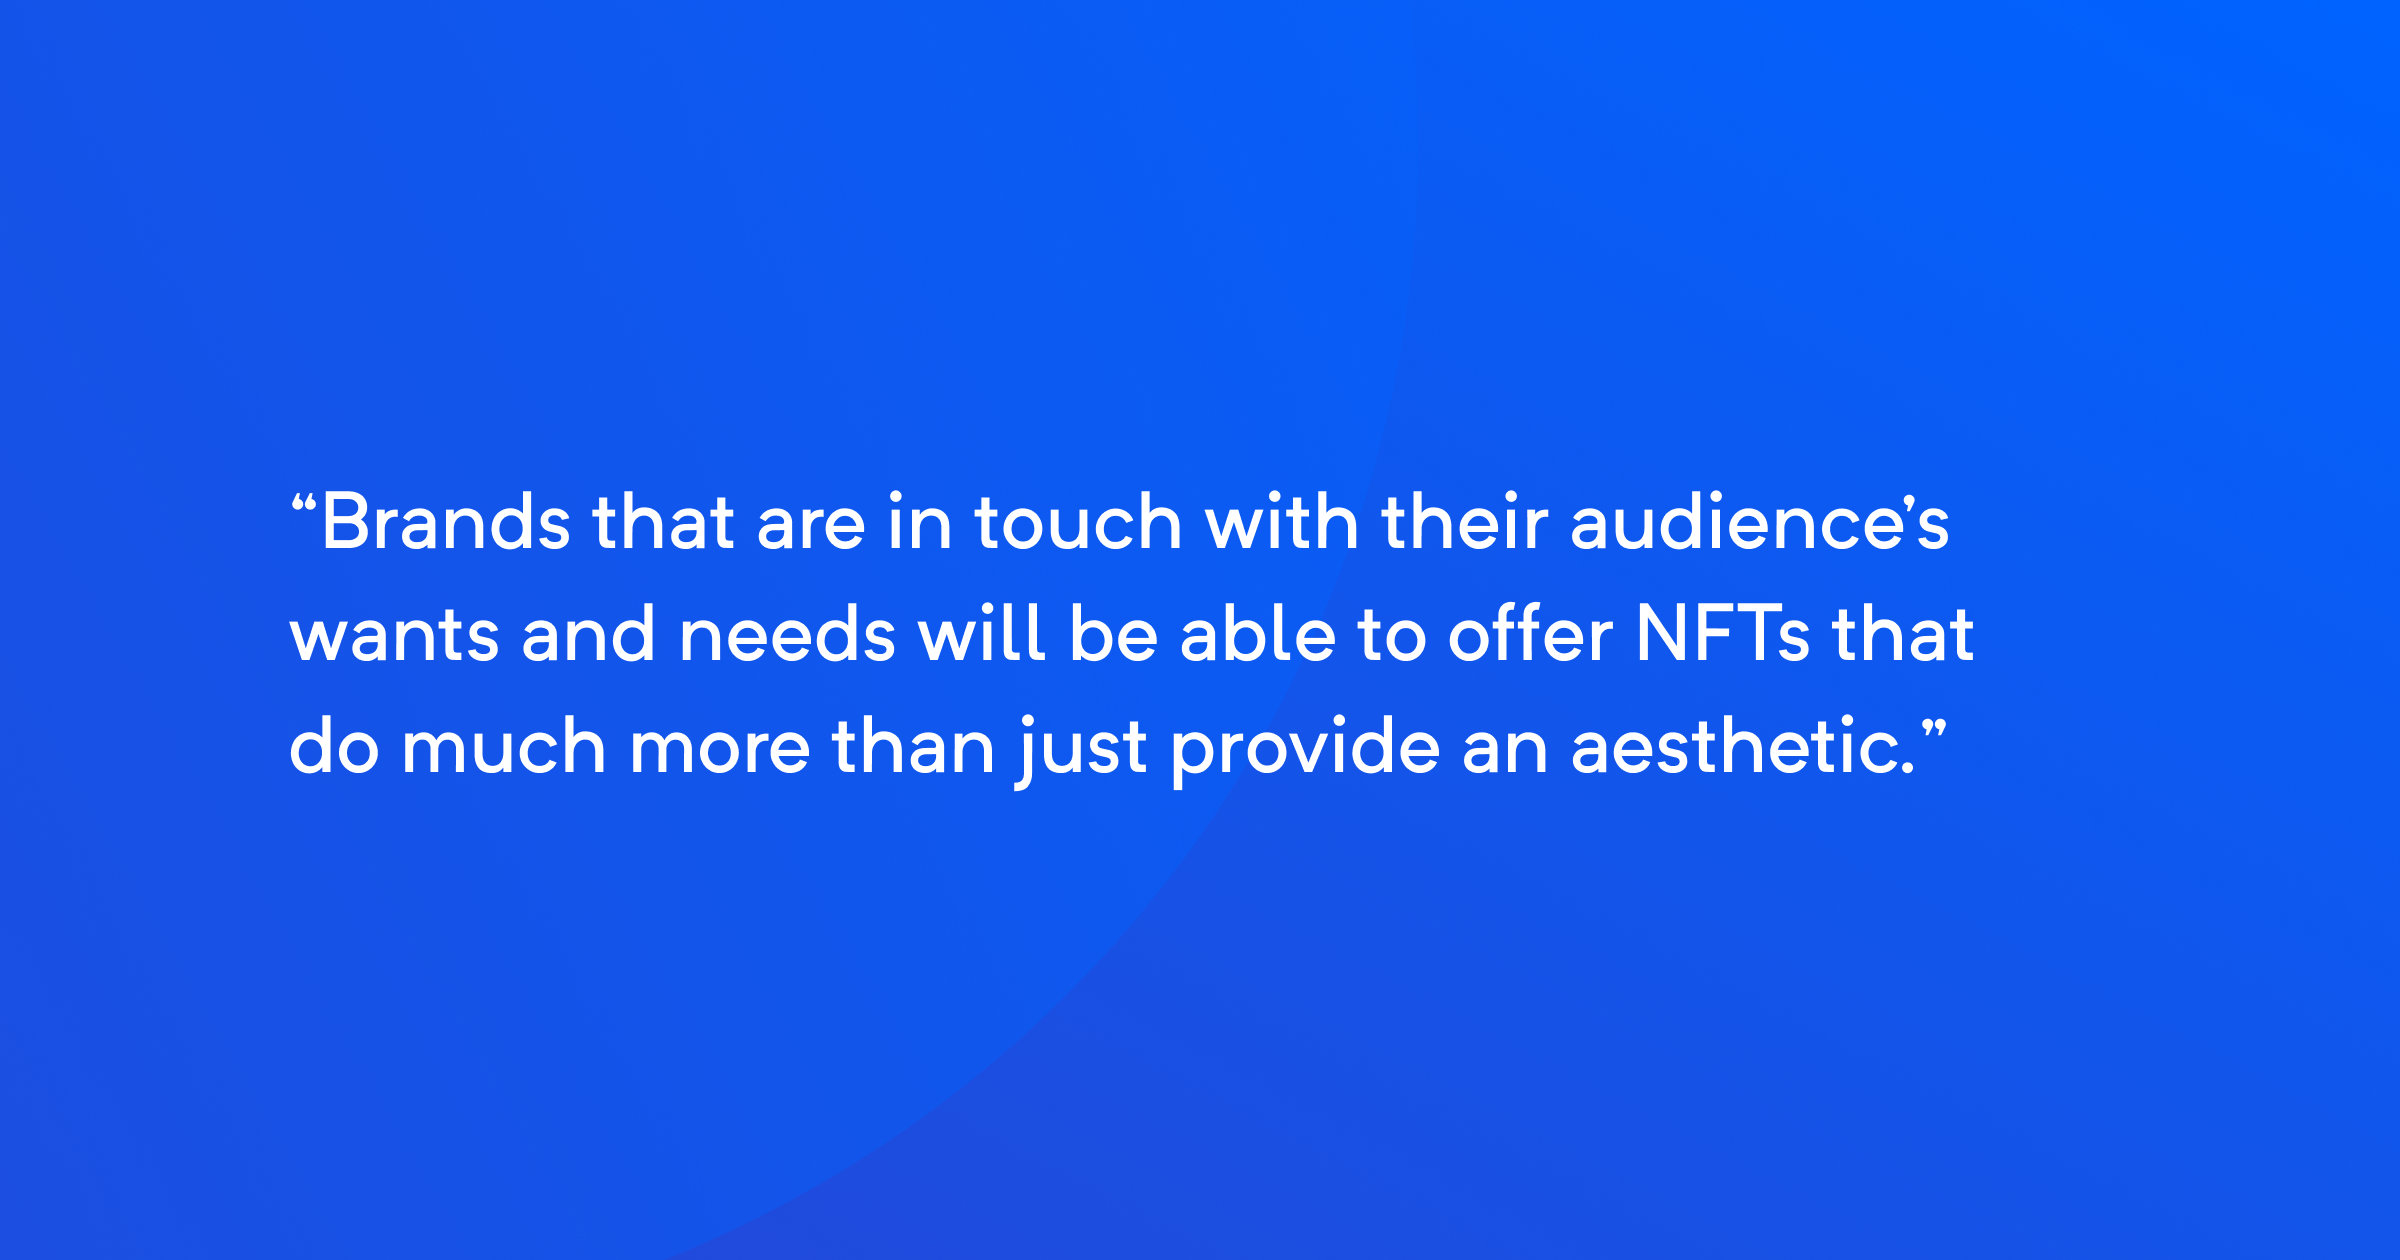 nft use cases